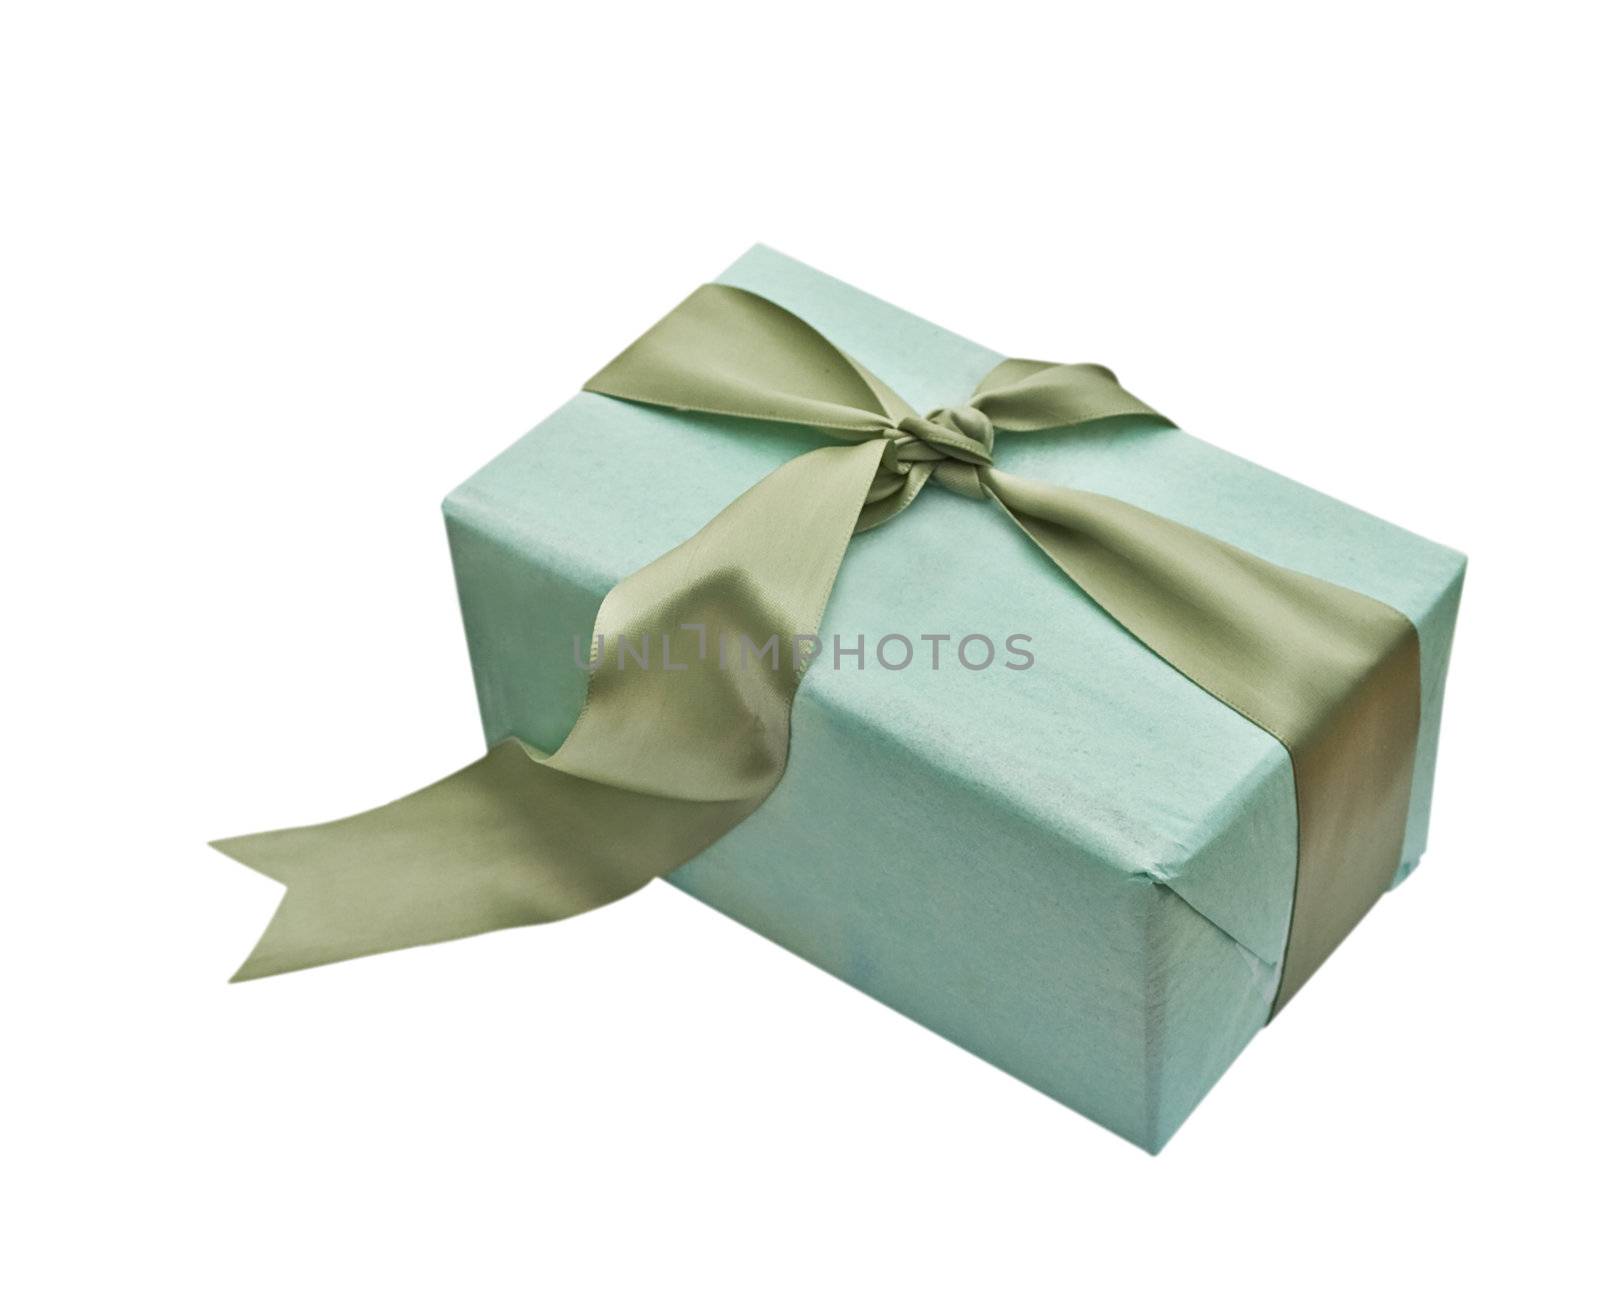 Gift box wrapped with wrapping tissue and a satin bow isolated on a white background